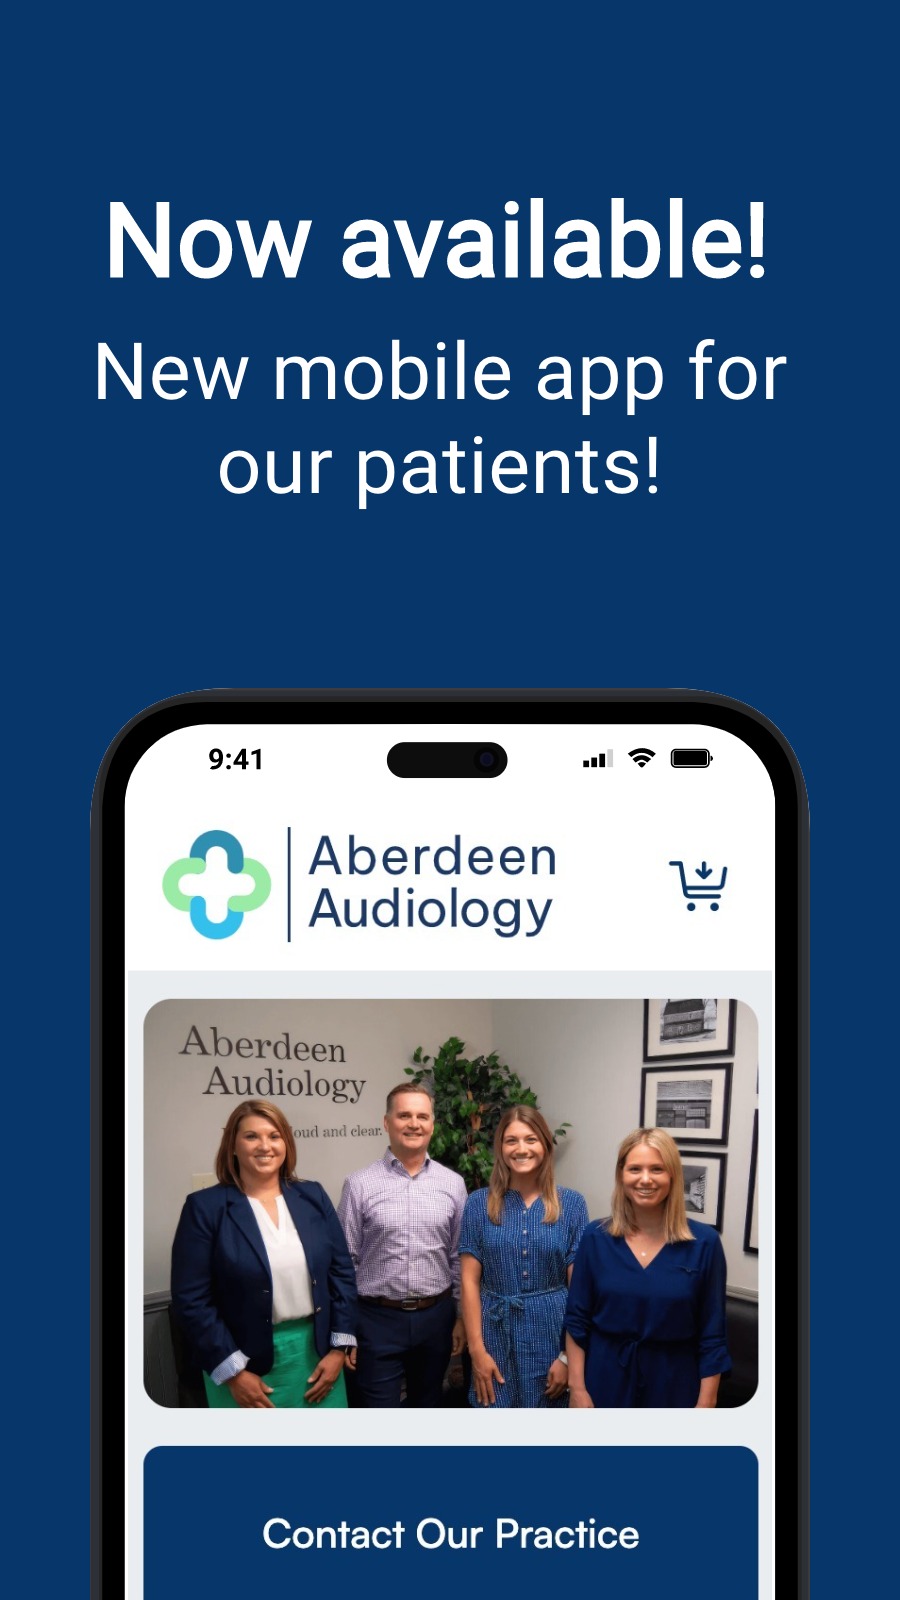 Now available! - New mobile app for our patients!